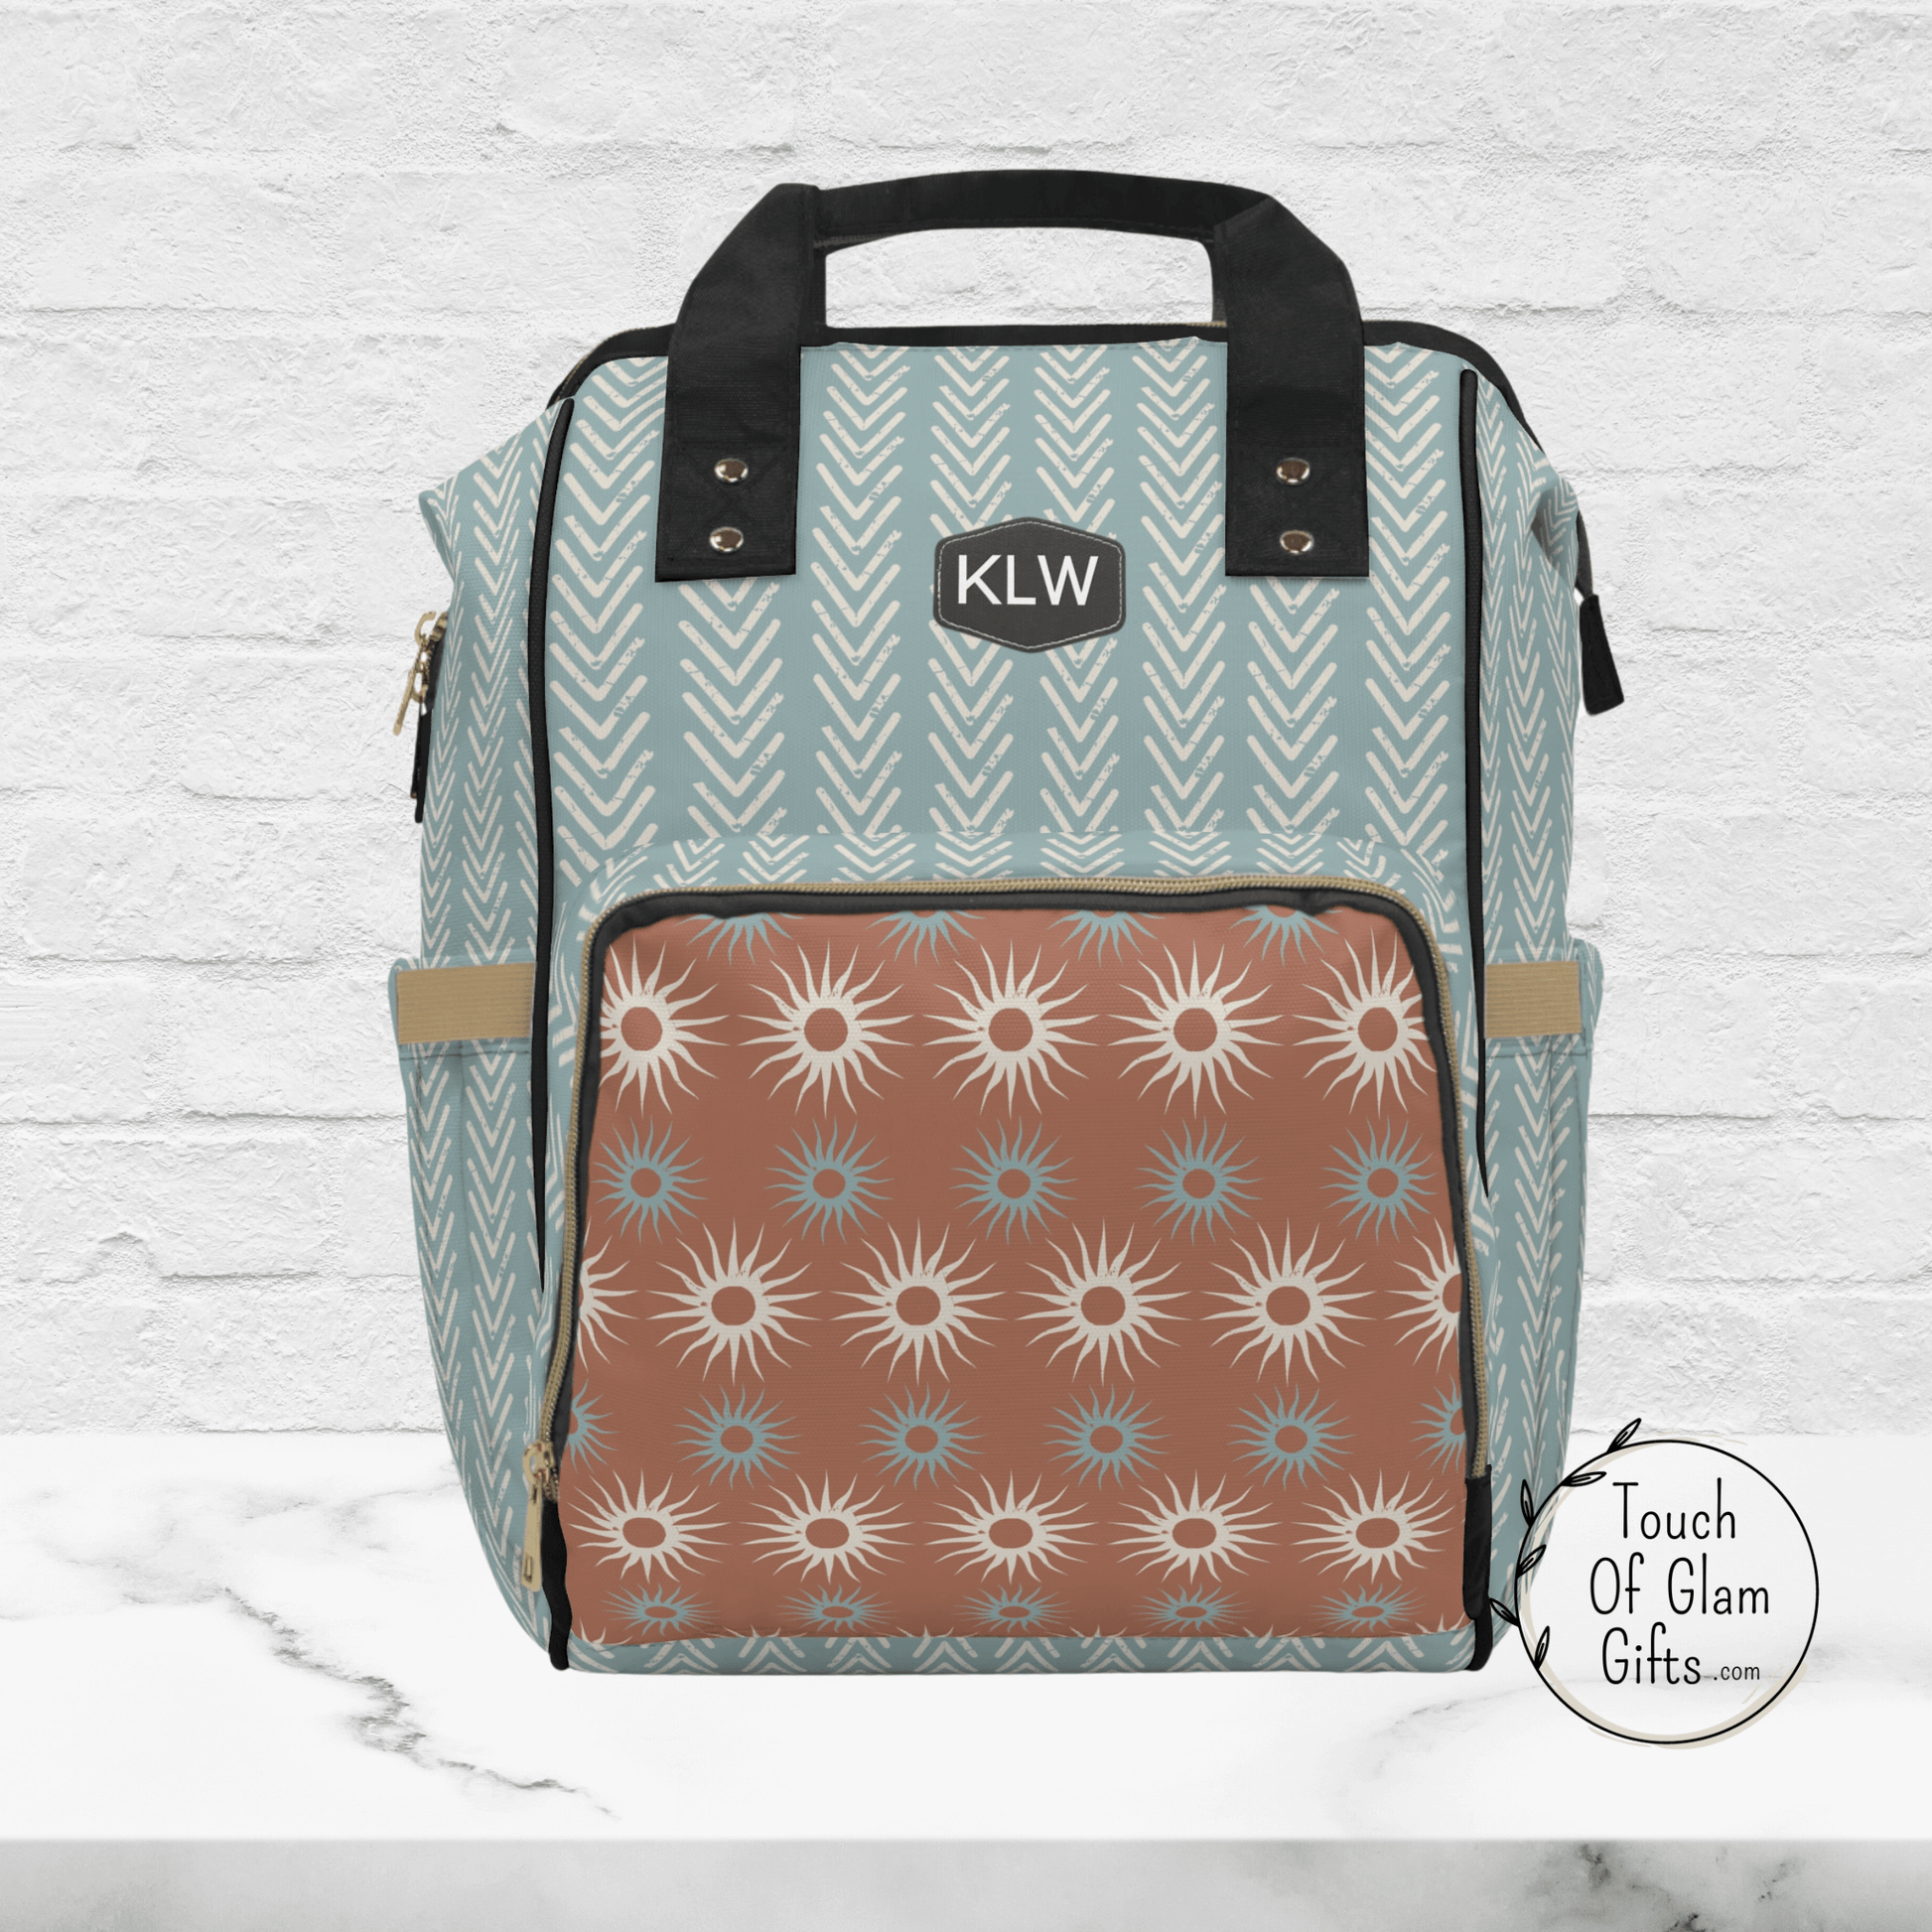 This boho diaper backpack looks like a stylish travel bag and not a diaper baby bag because its so cute. The black accents with black piping on the edges makes the sage green color pop.